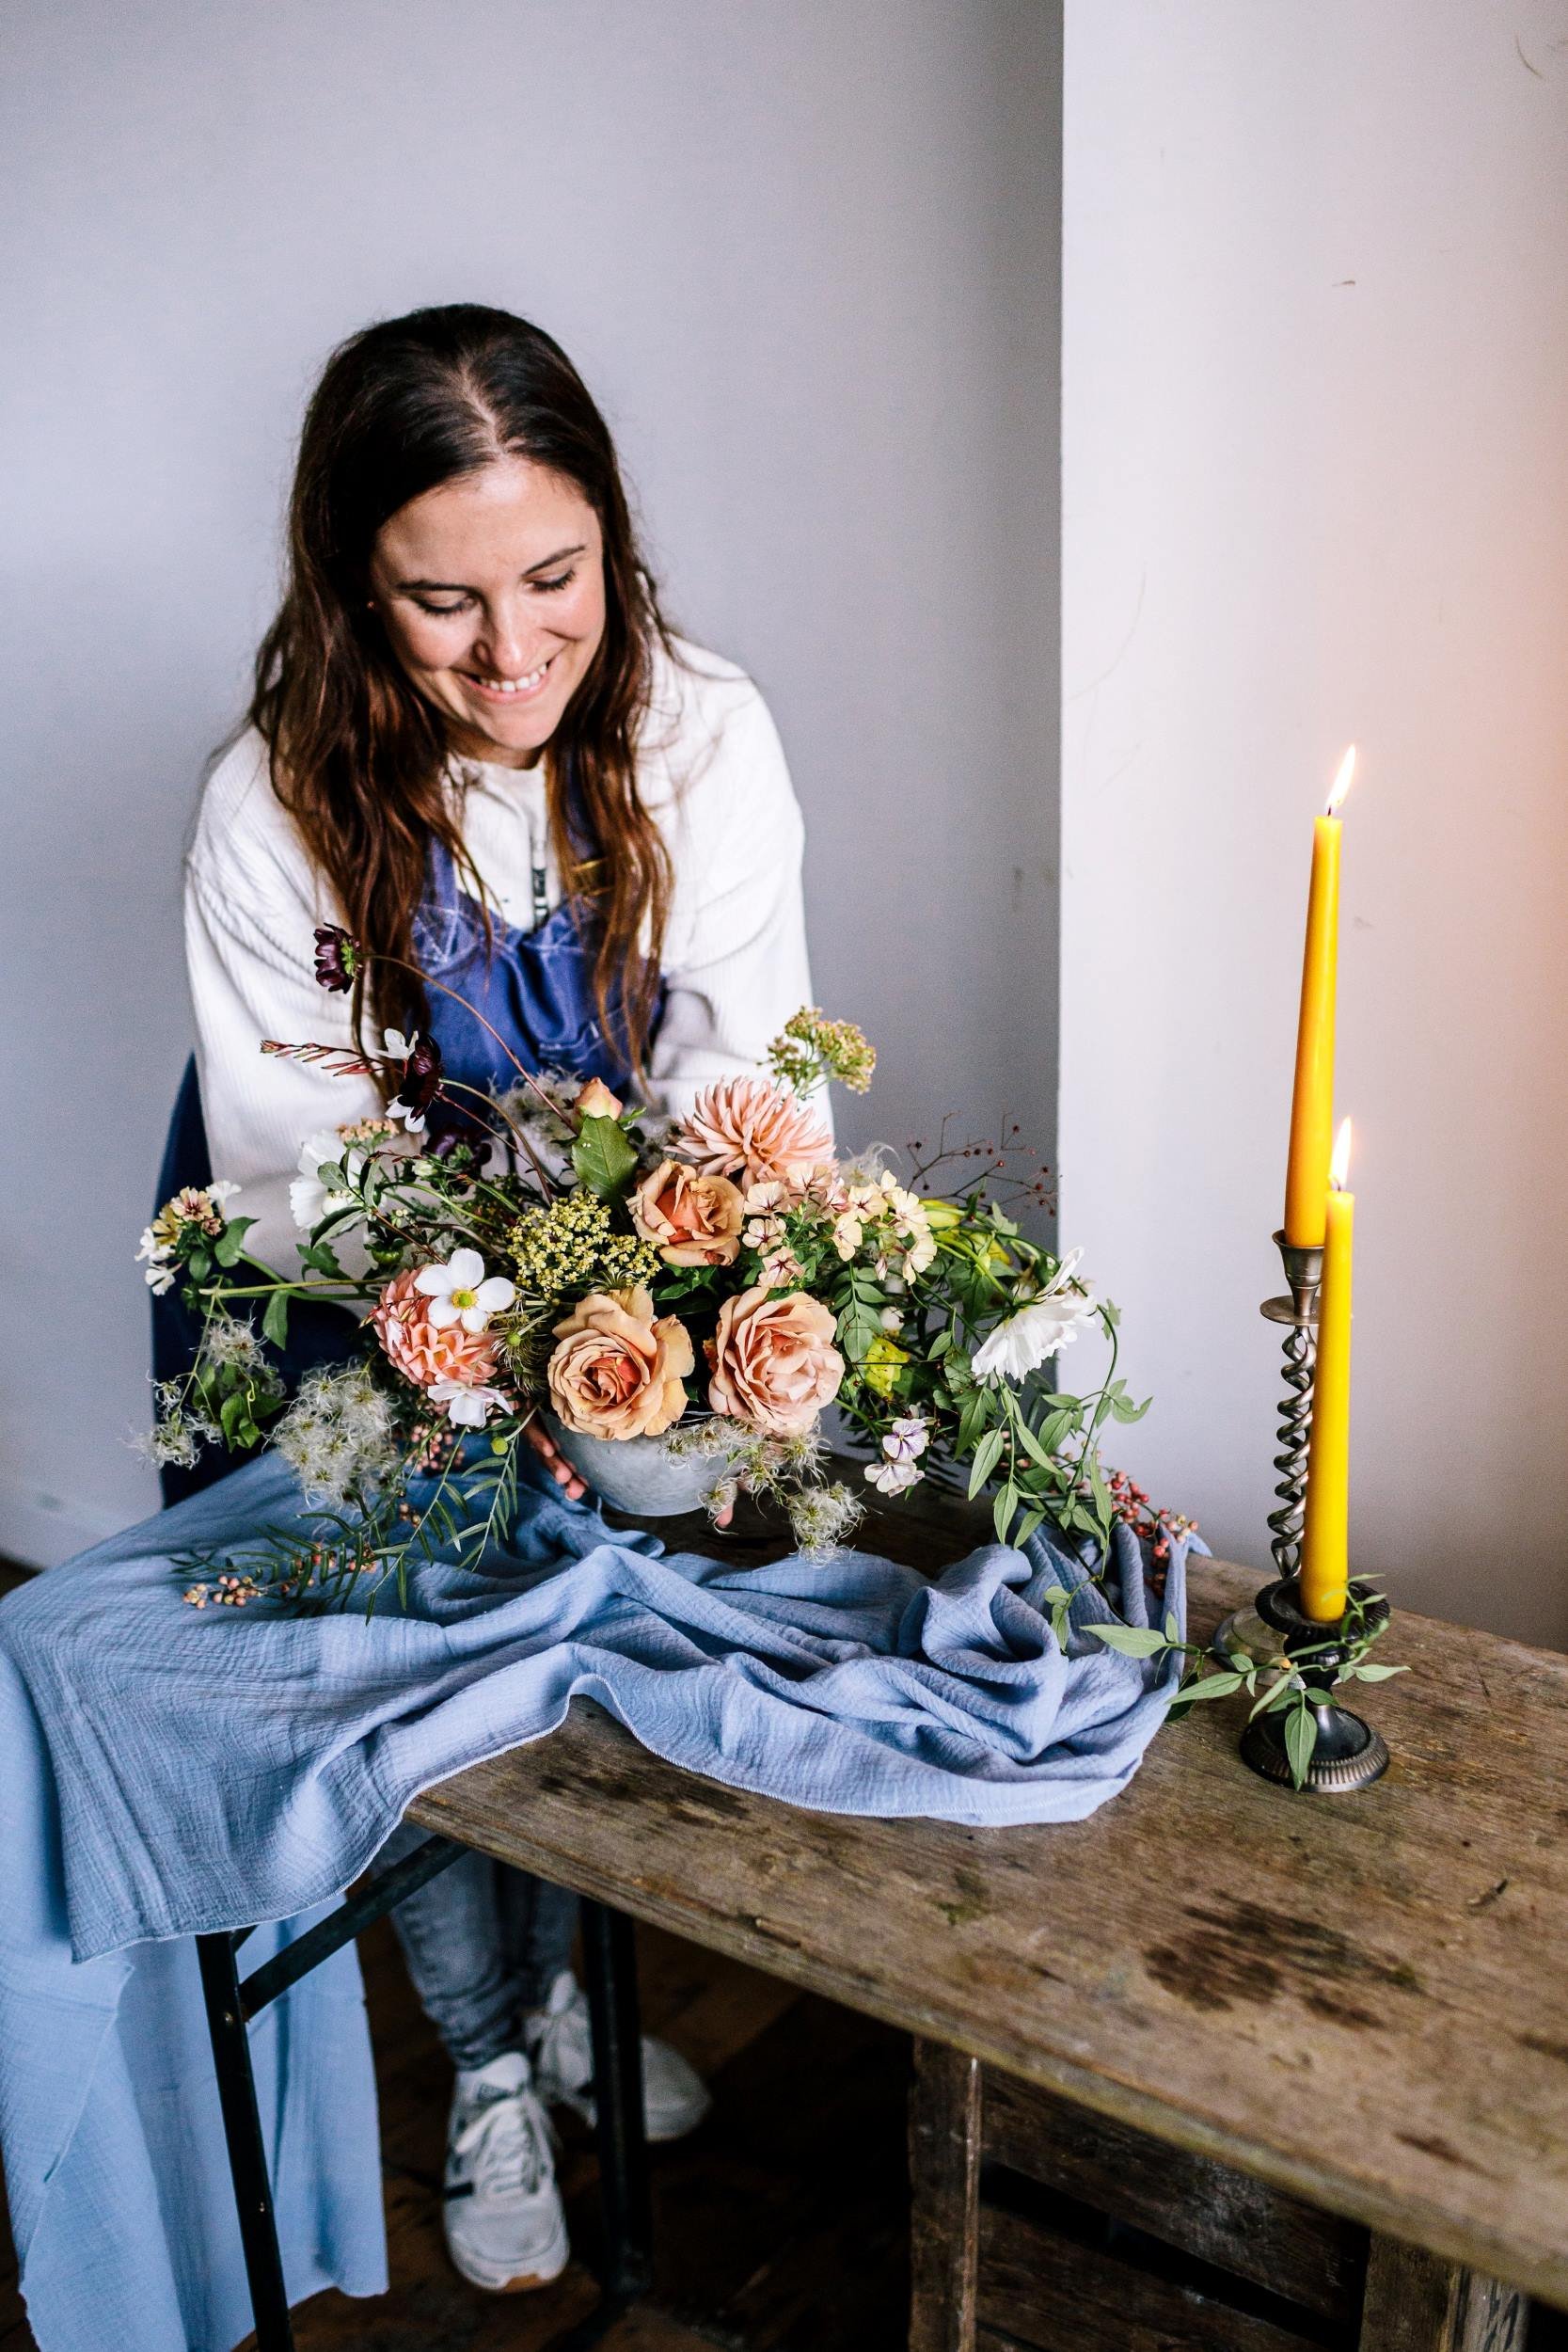 Student styling her wedding flowers table